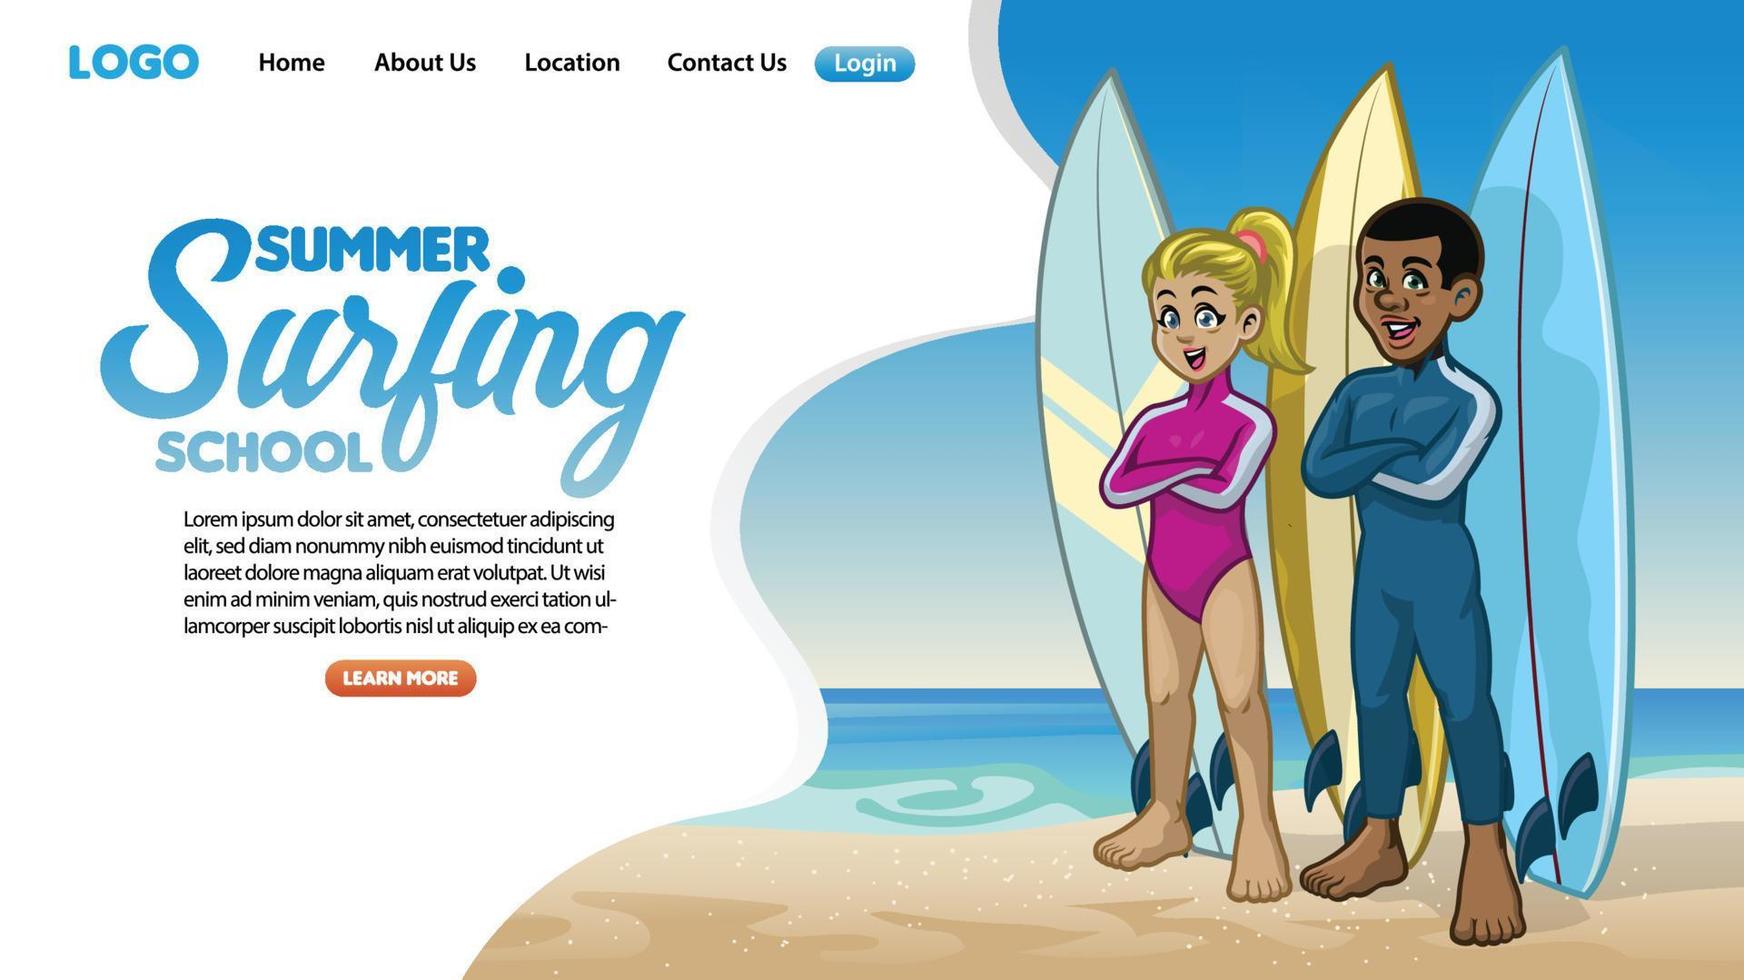 landing page design of surfing school theme vector